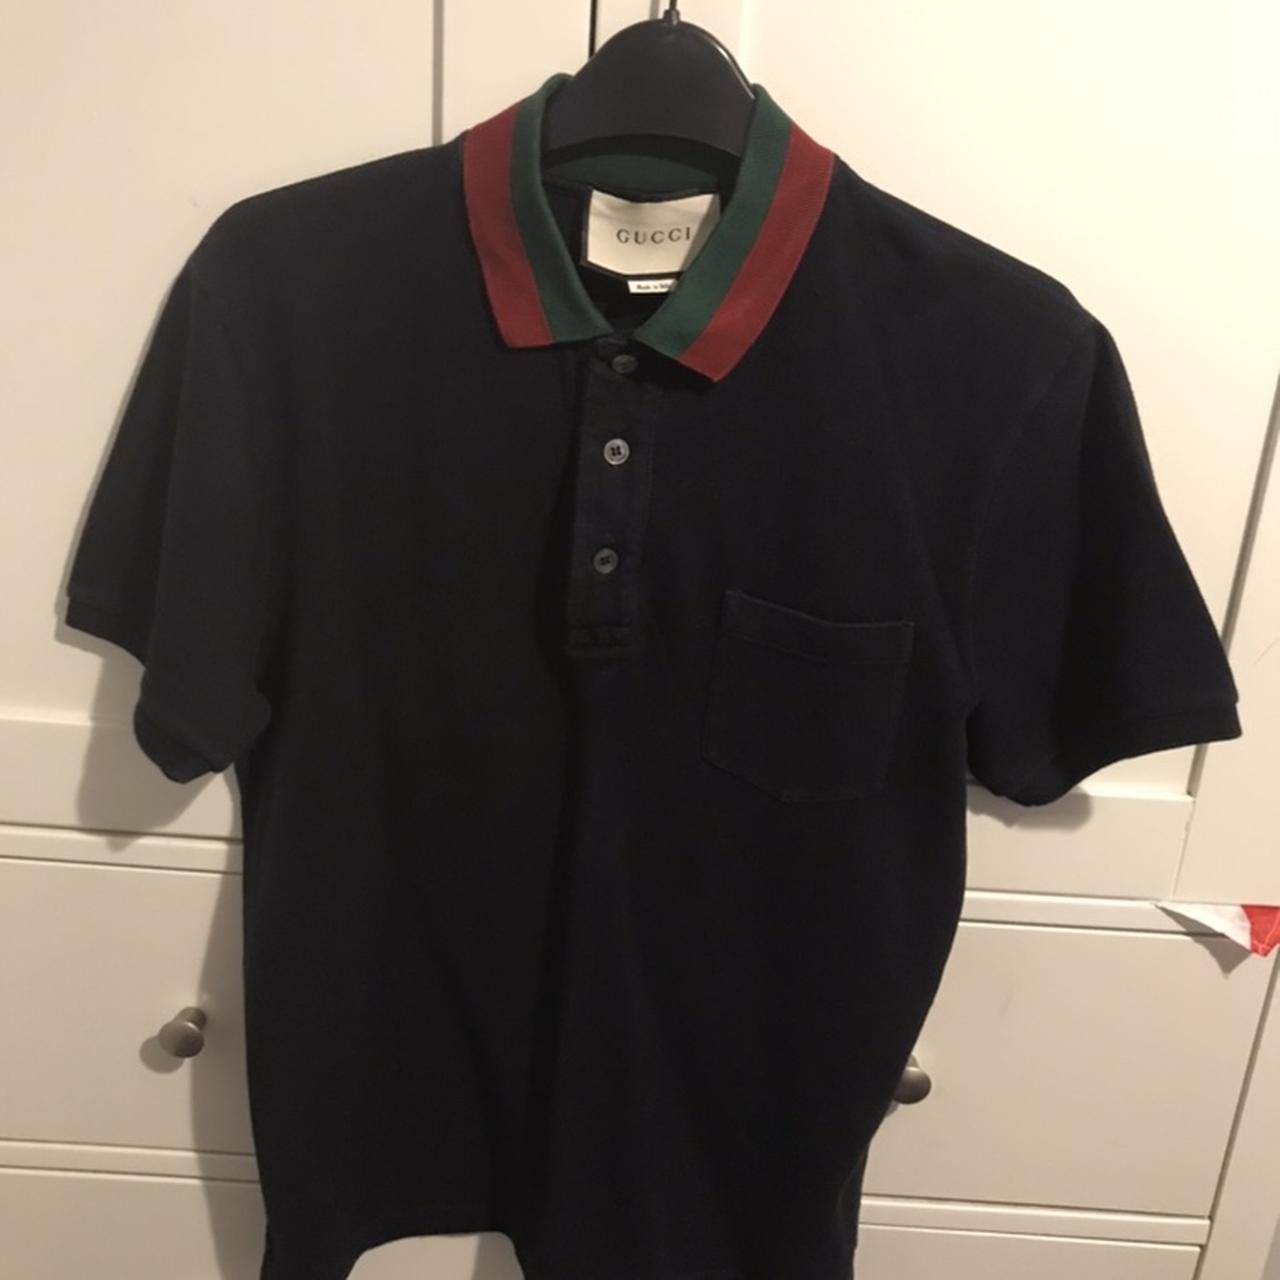 Gucci polo shirt, good condition apart from buttons... - Depop